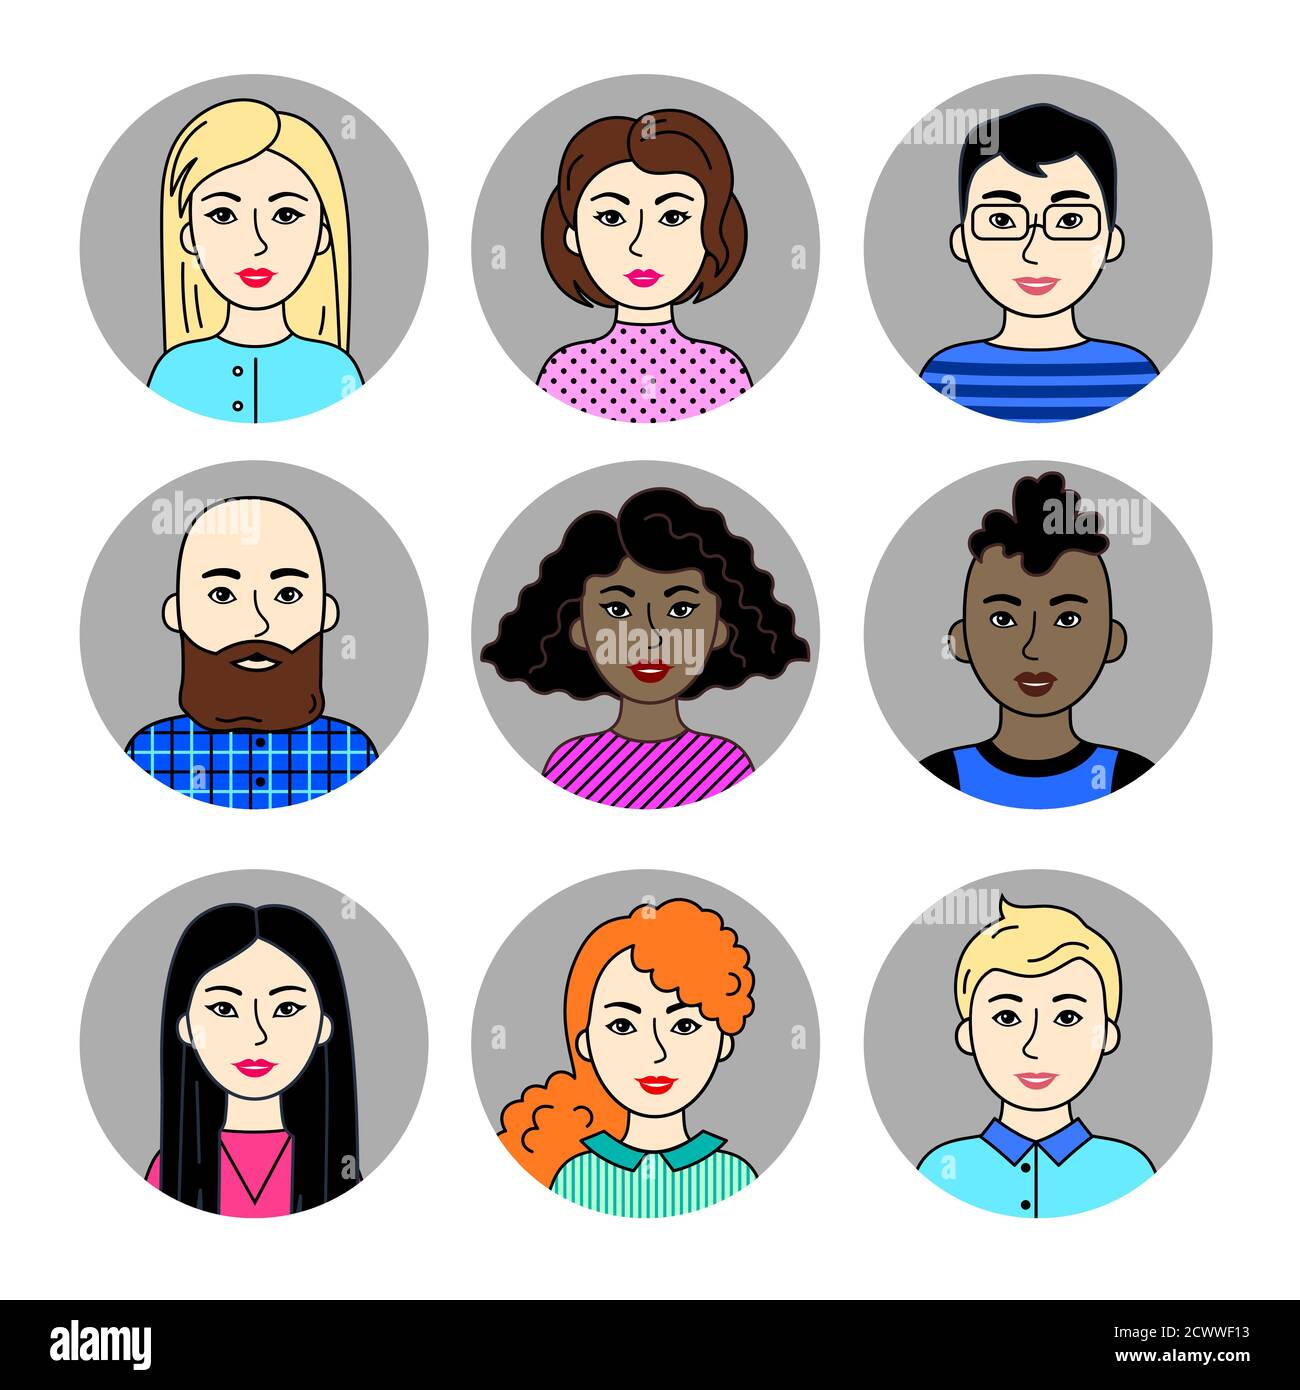 Men and women of different nations, skin and hair colors. Asian, European, African people, cartoon simple portraits. Multiethnic society. Collection o Stock Vector